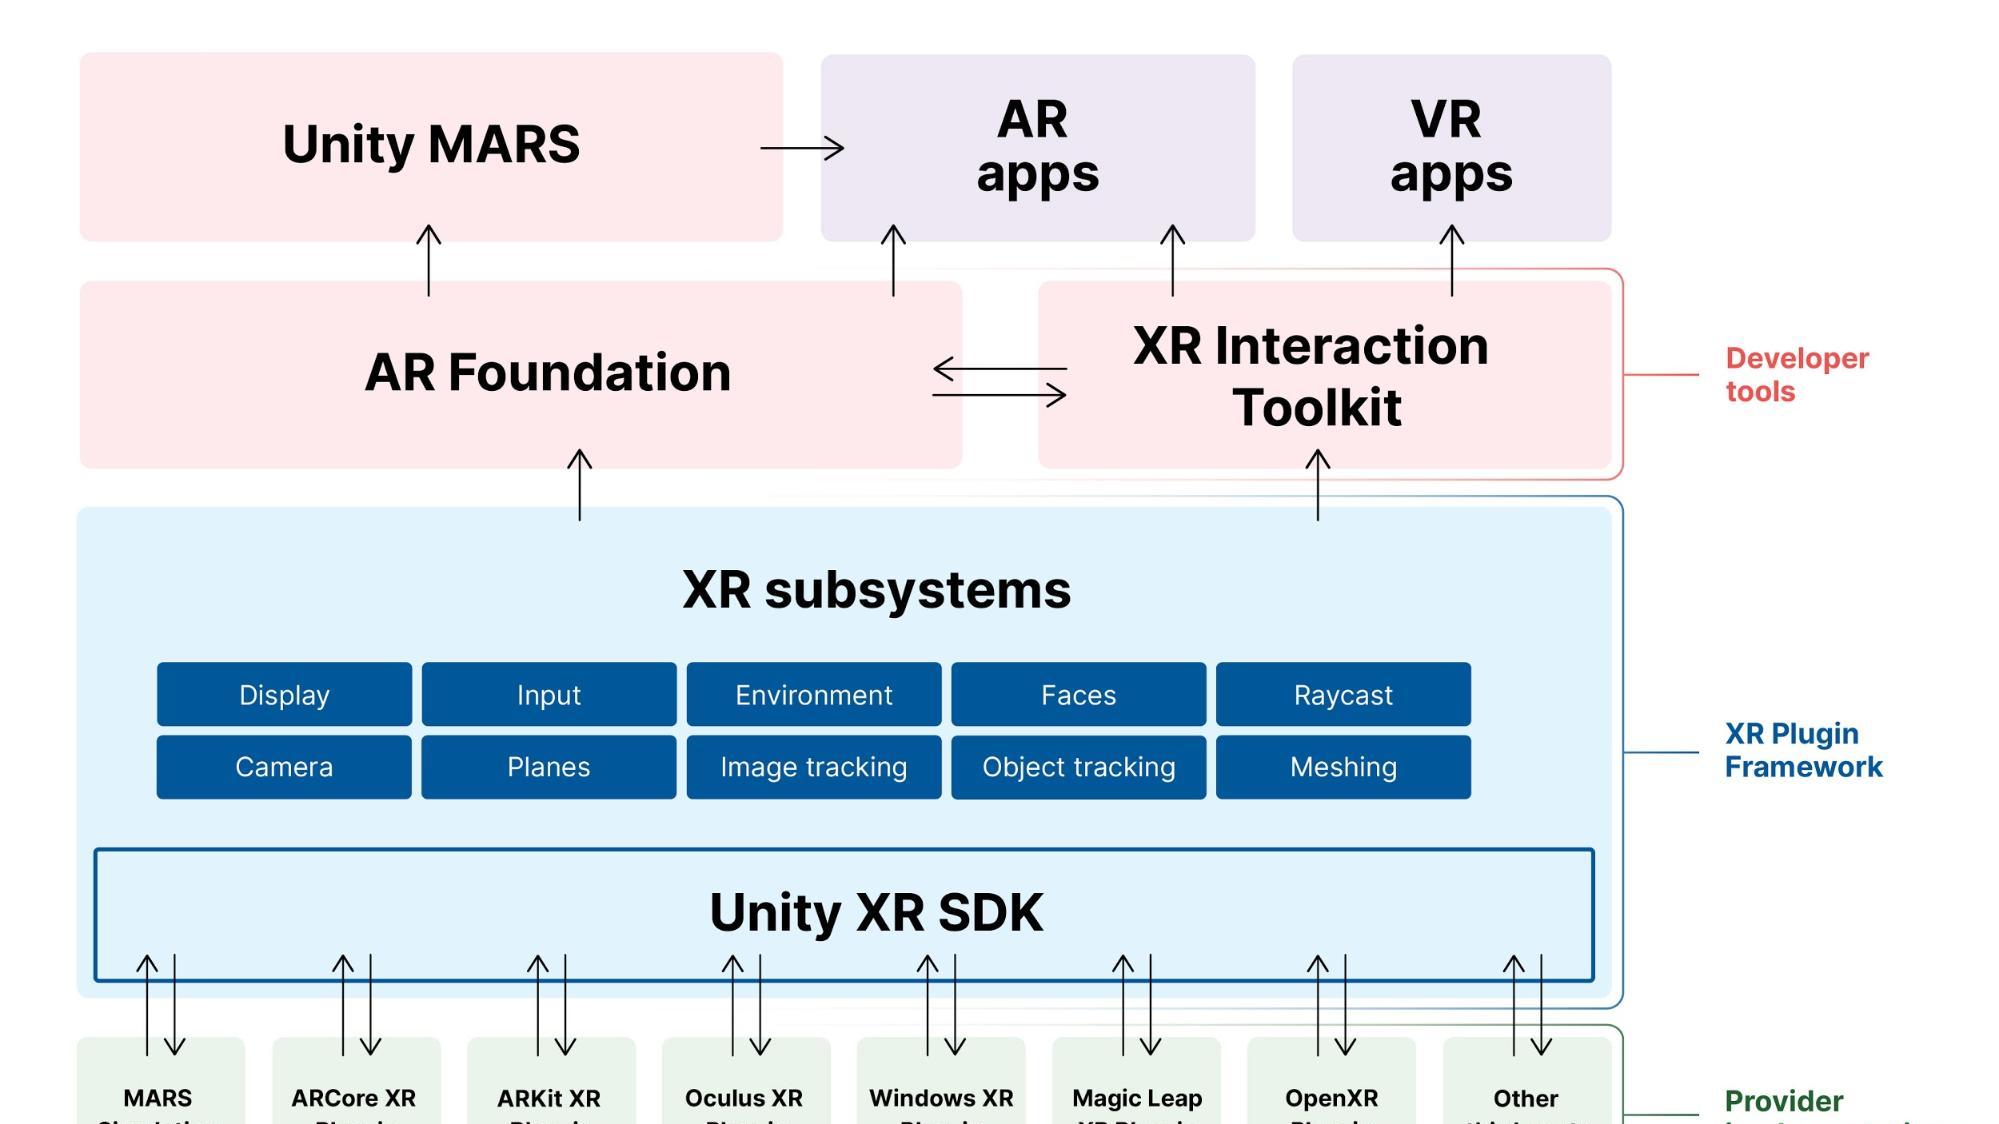 Unity XR tech stack